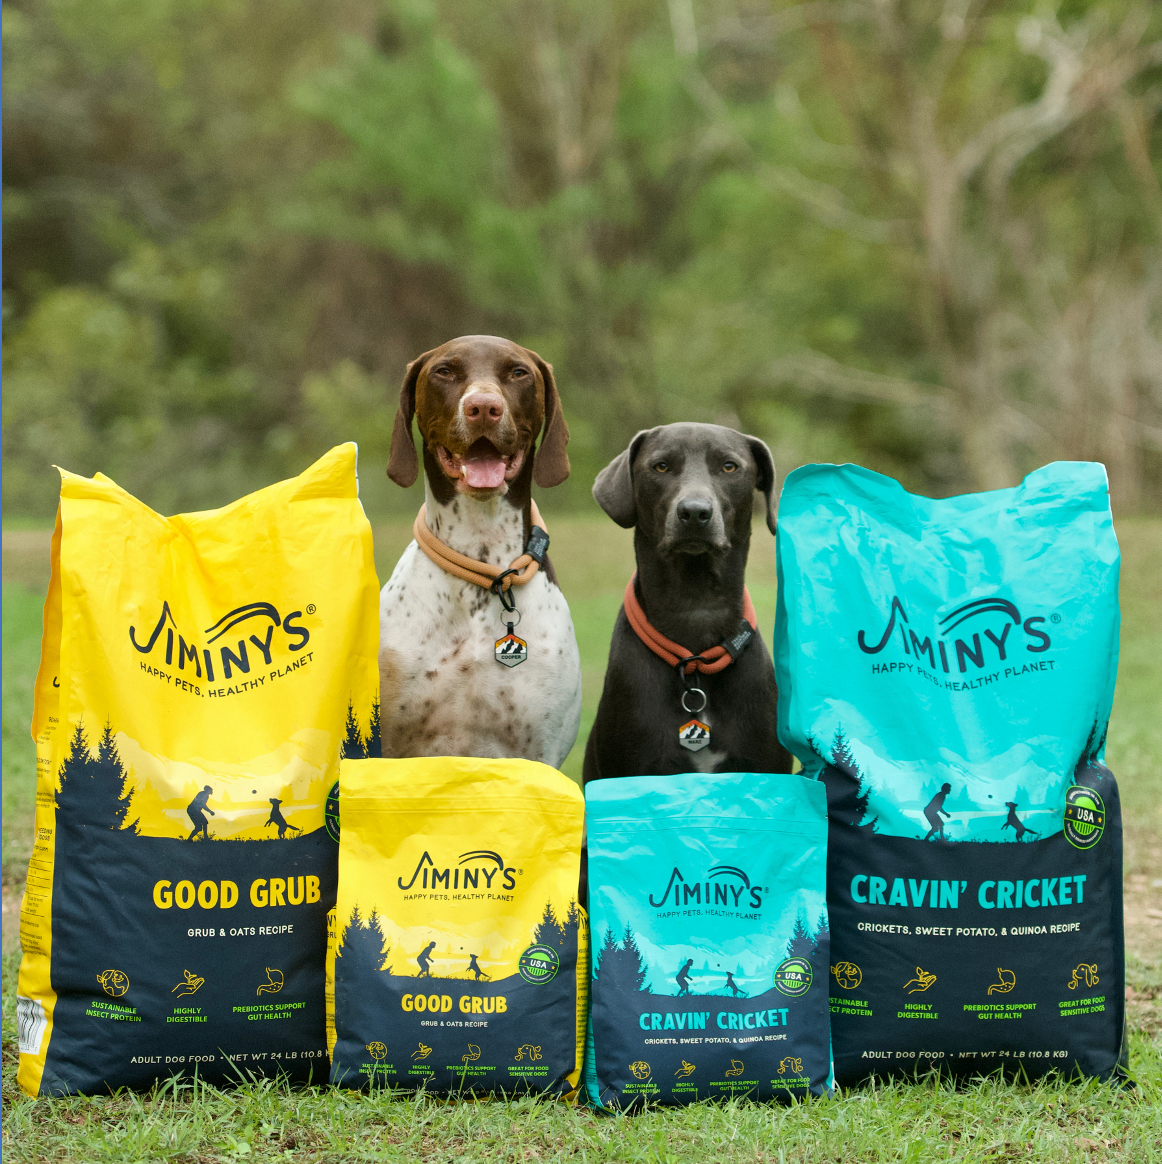 dog with Jiminy's Rotation Diet Combo Pack: Cravin' Cricket and Good Grub Dog Food